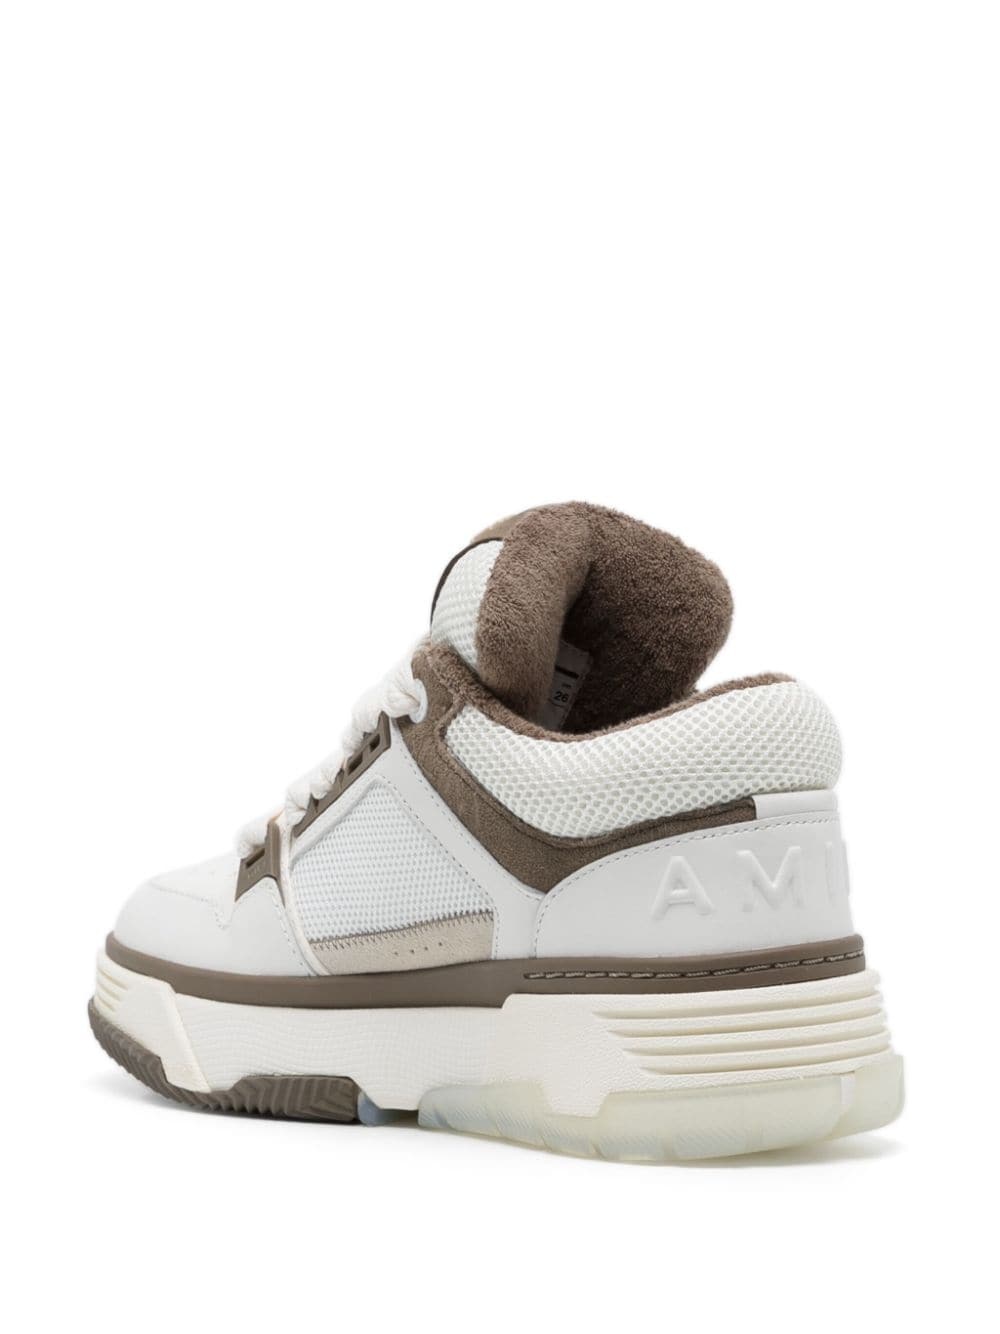 MA-1 leather sneakers - 3